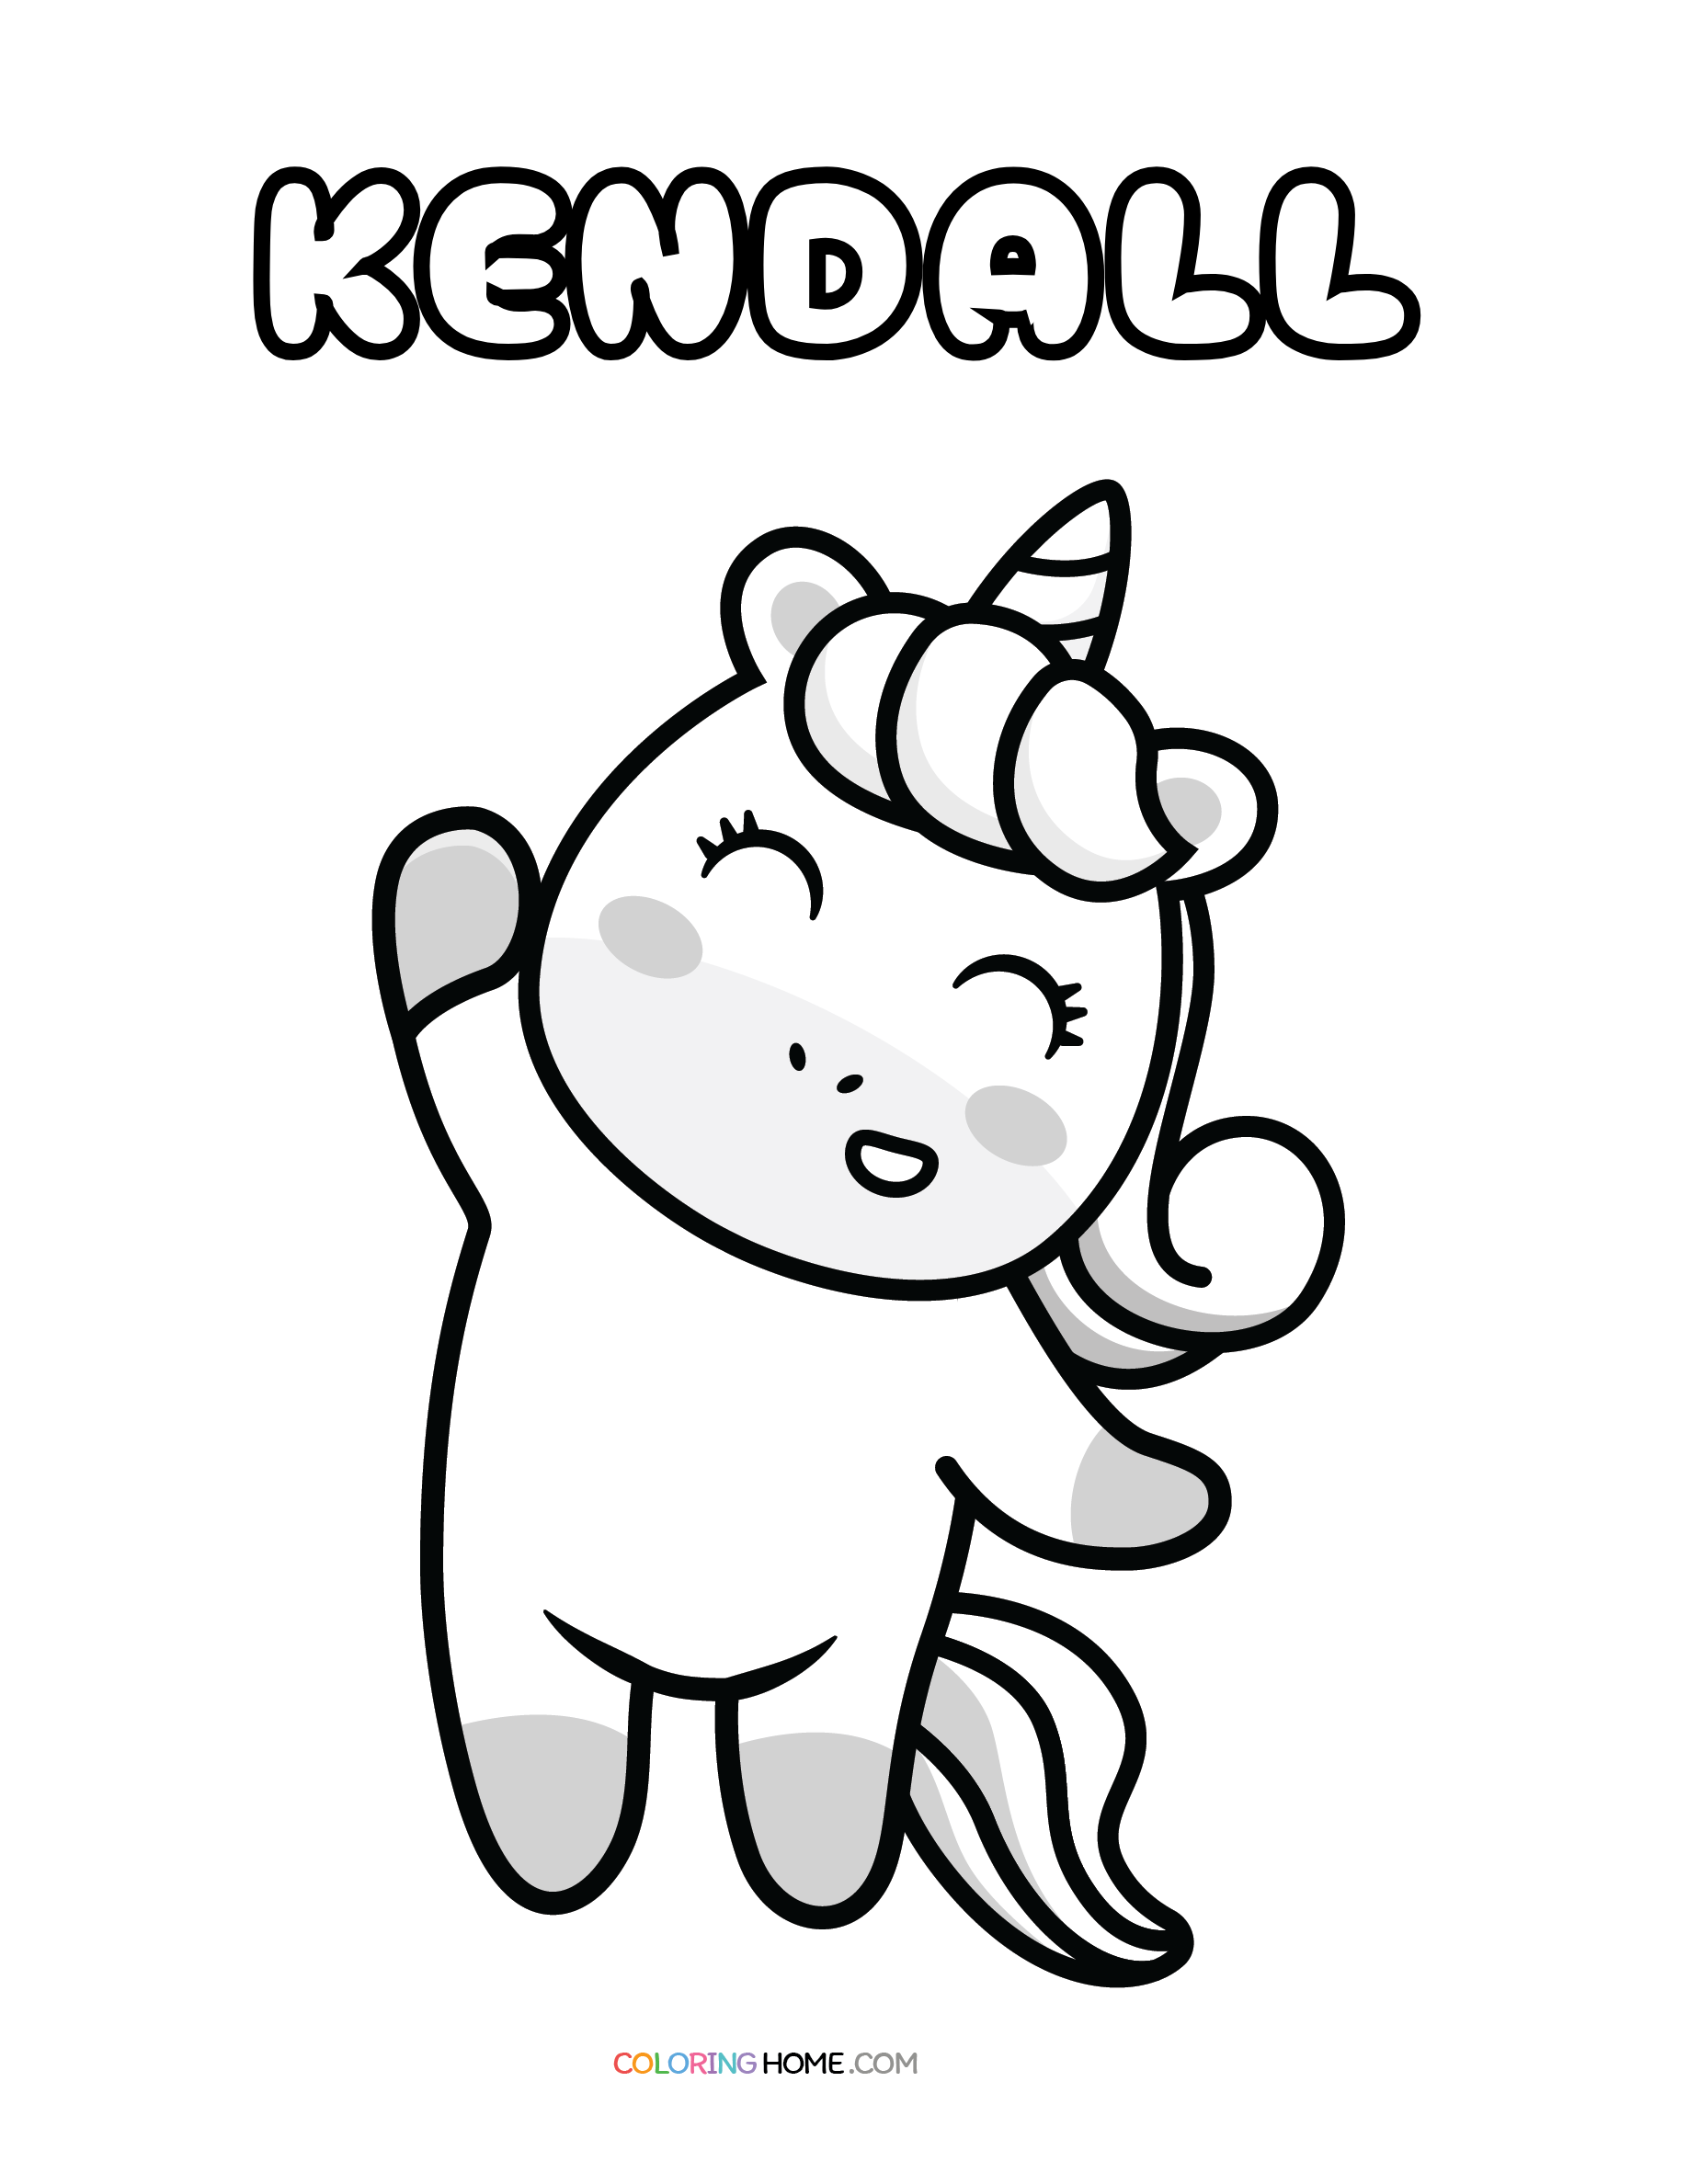 Kendall unicorn coloring page